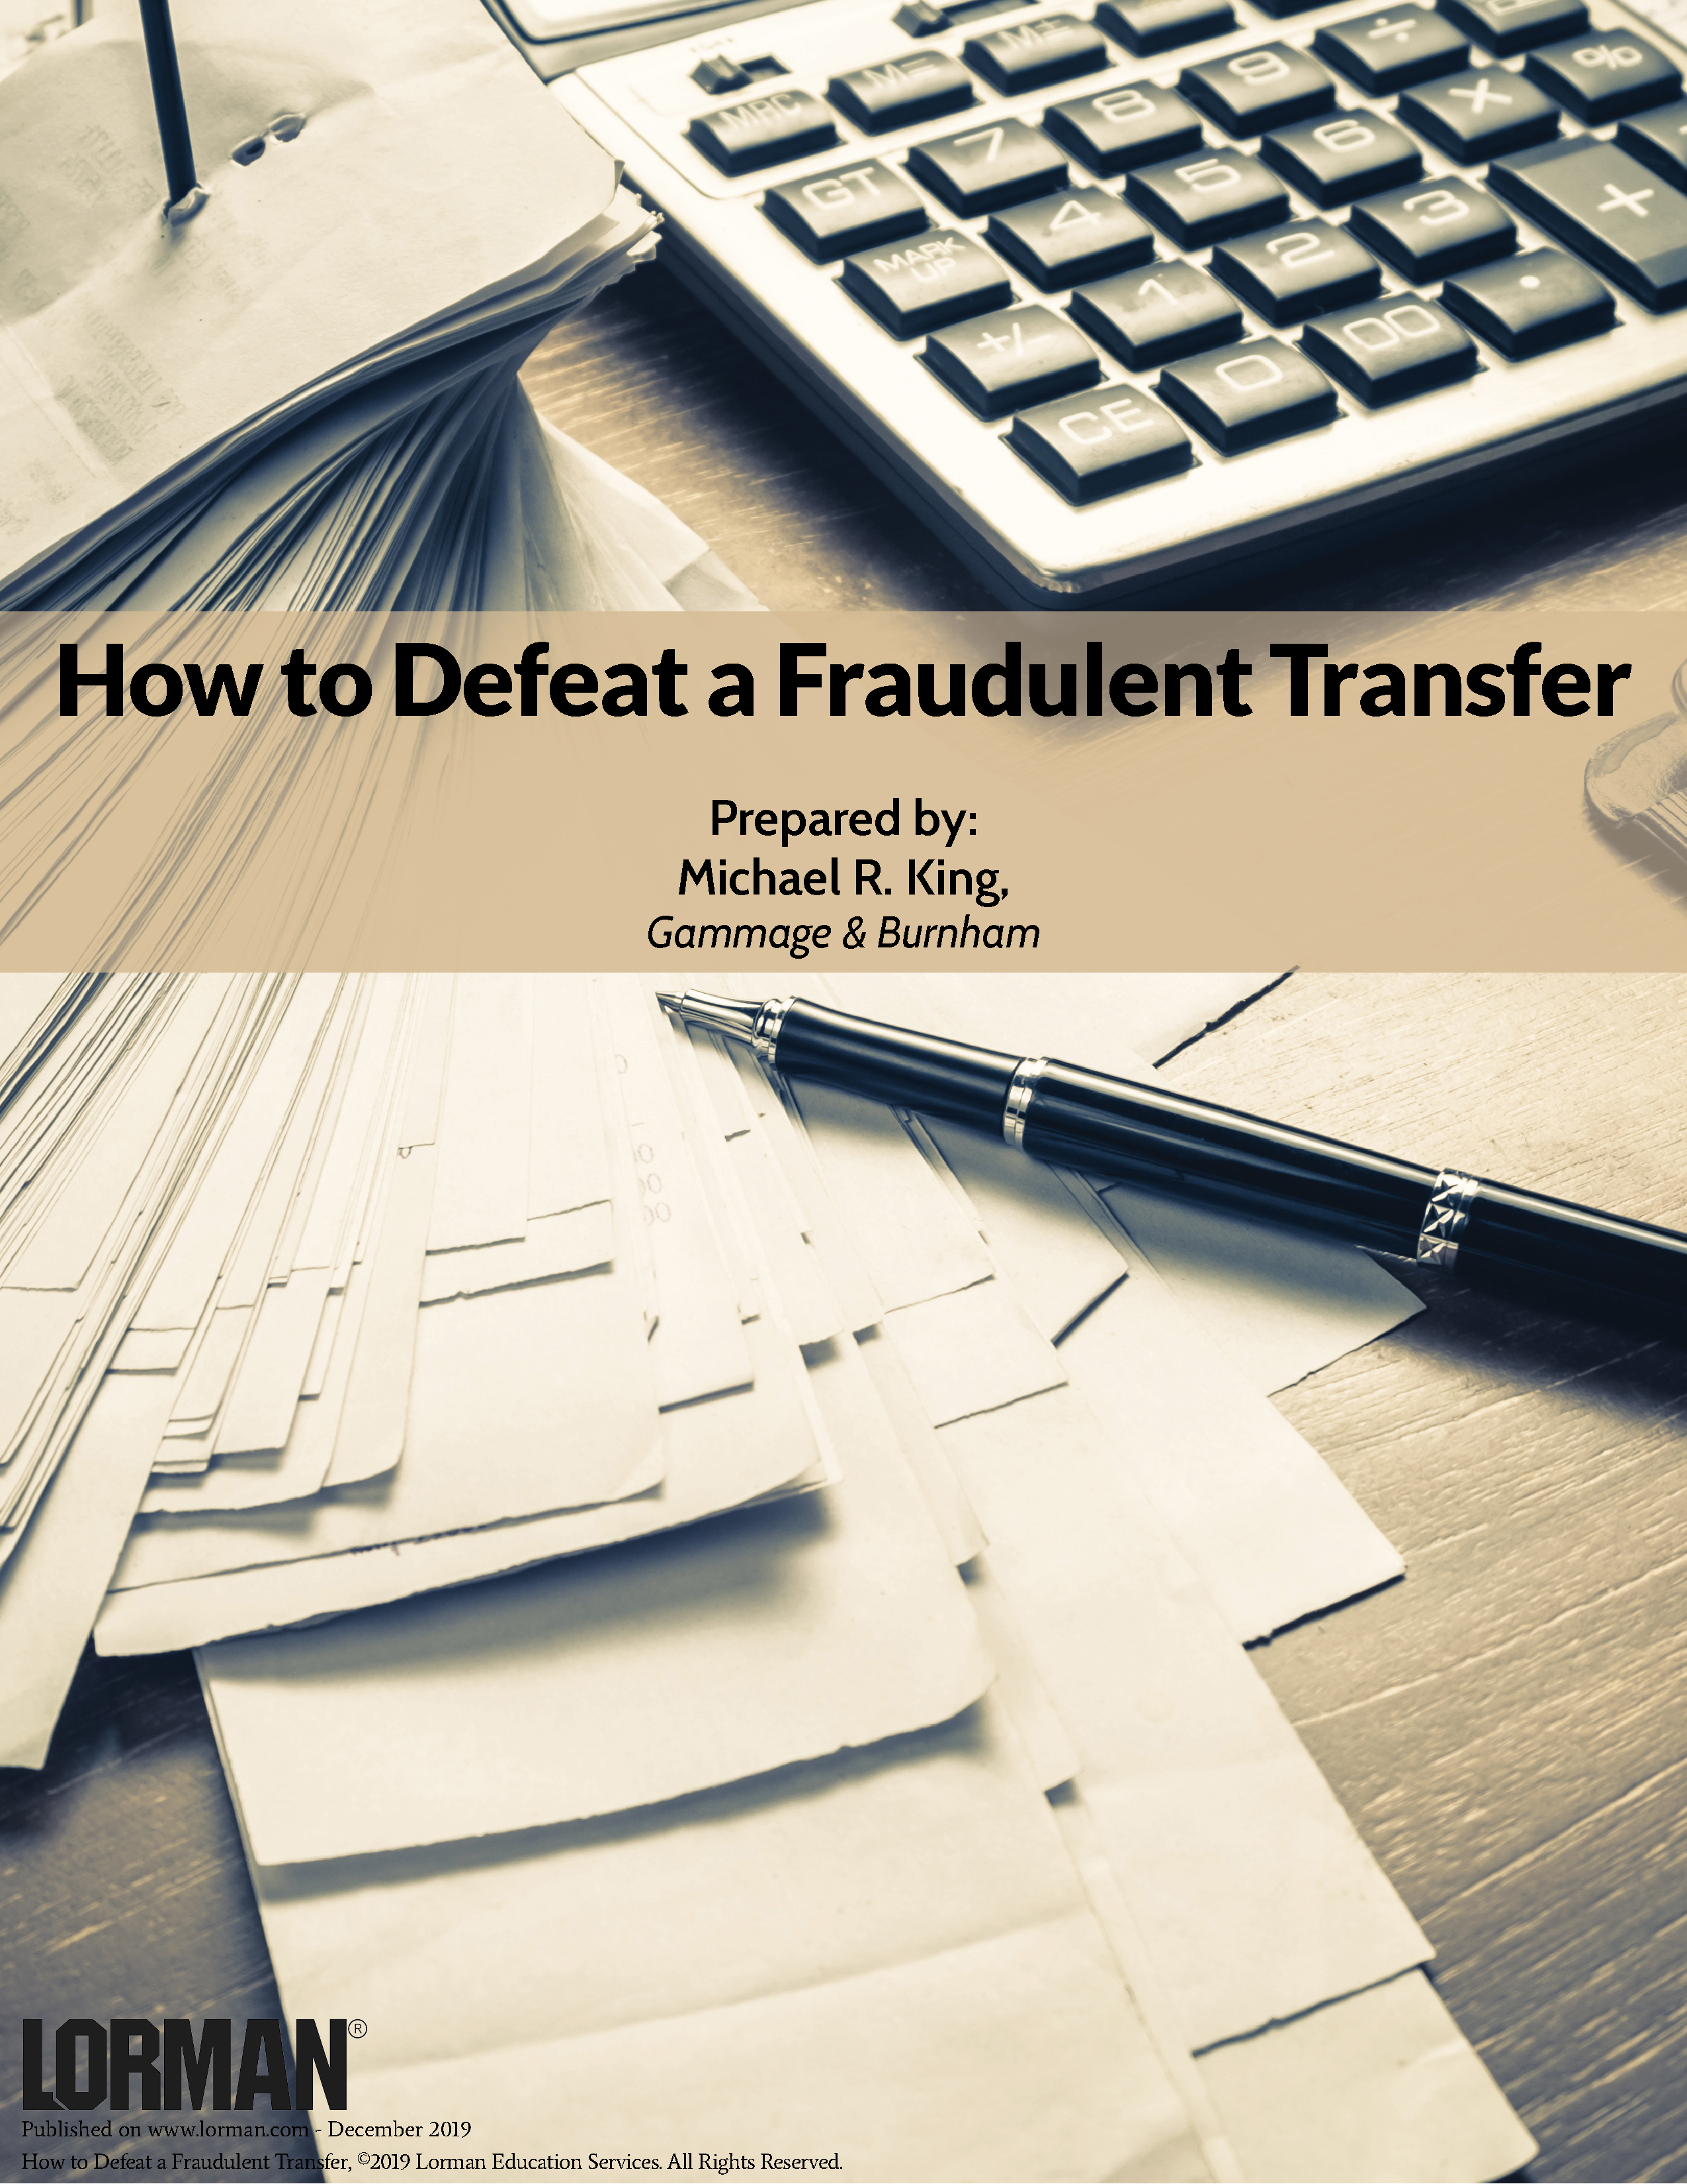 How to Defeat a Fraudulent Transfer